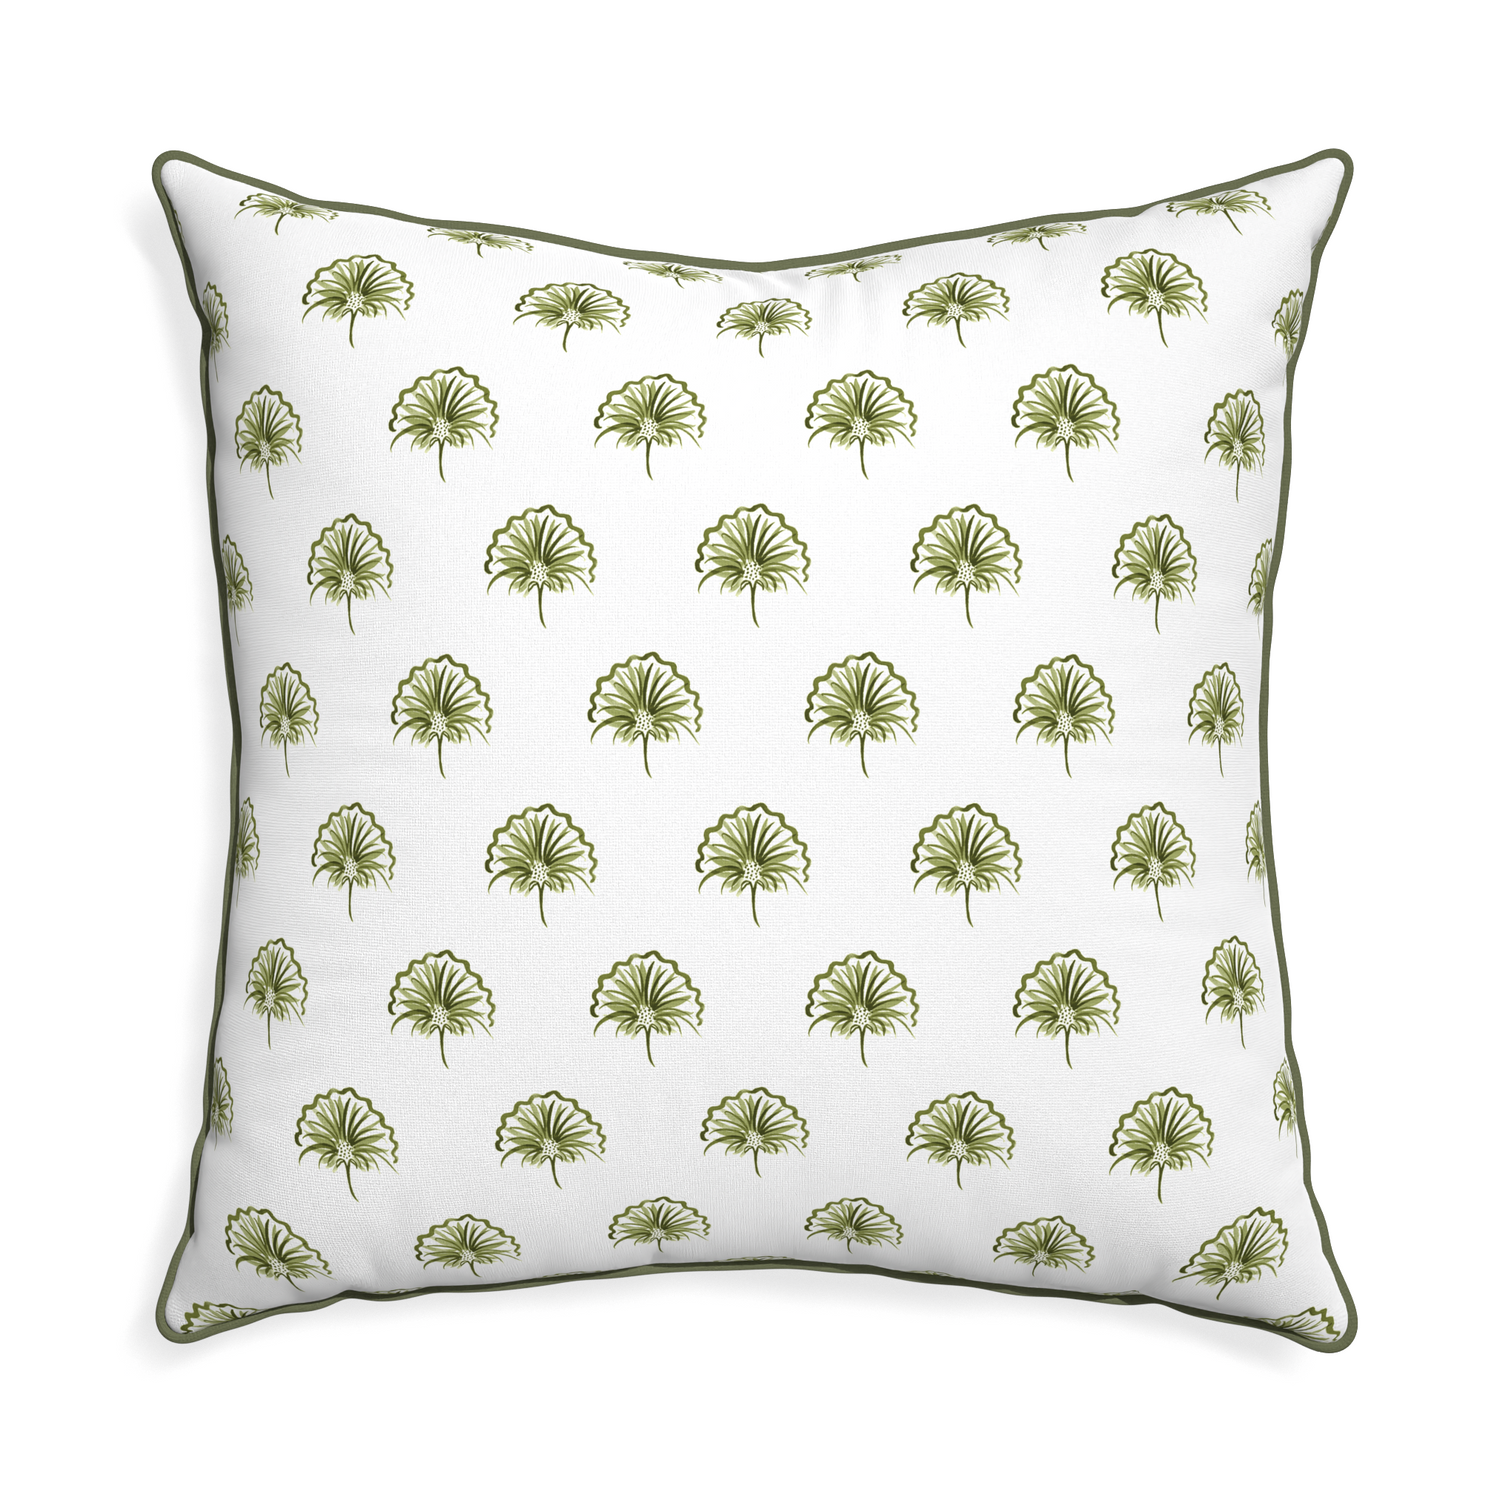 Euro-sham penelope moss custom pillow with f piping on white background